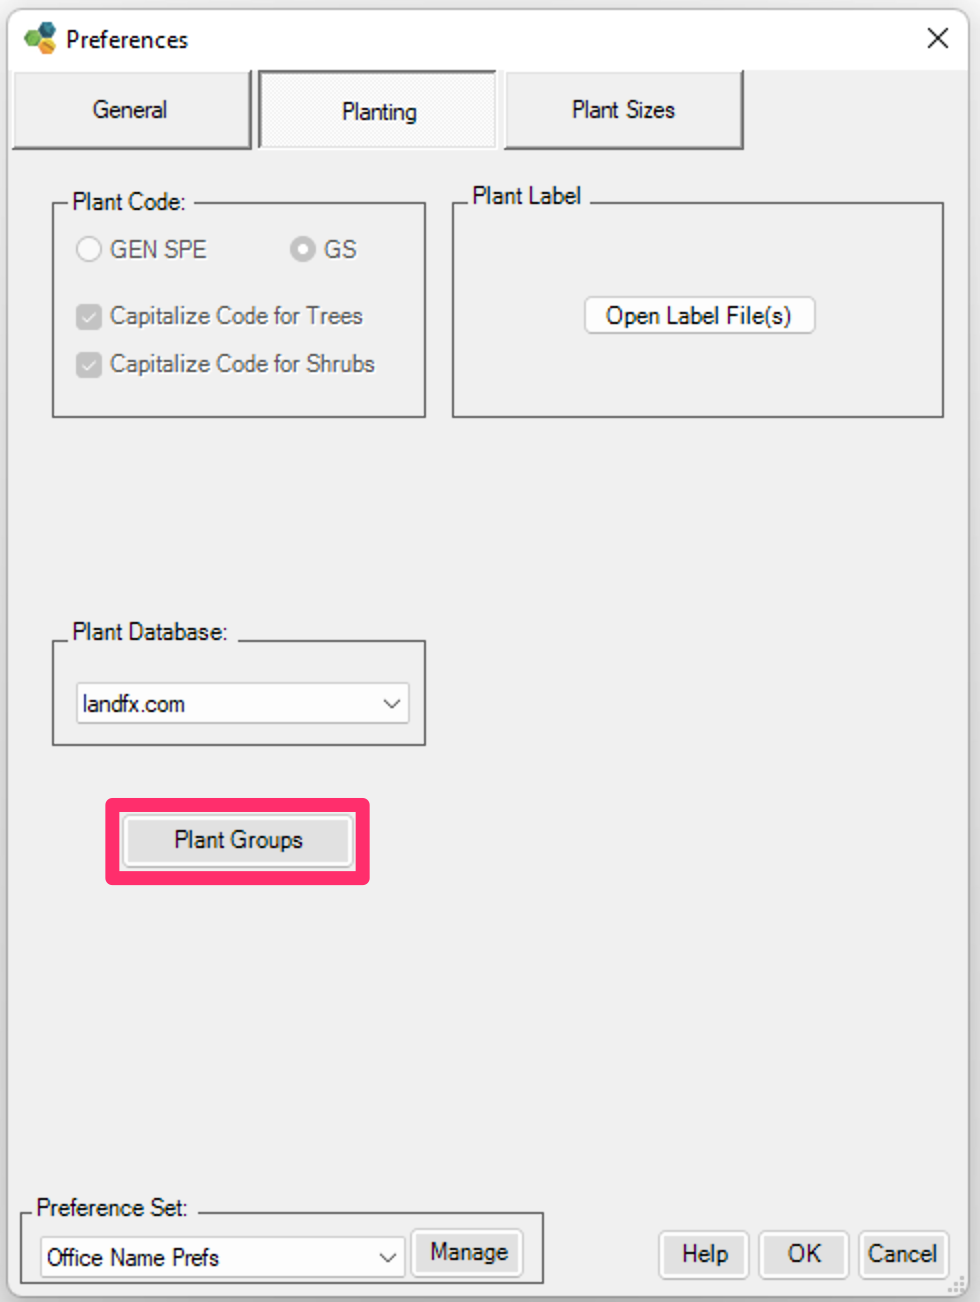 Planting Preferences screen, Groups button